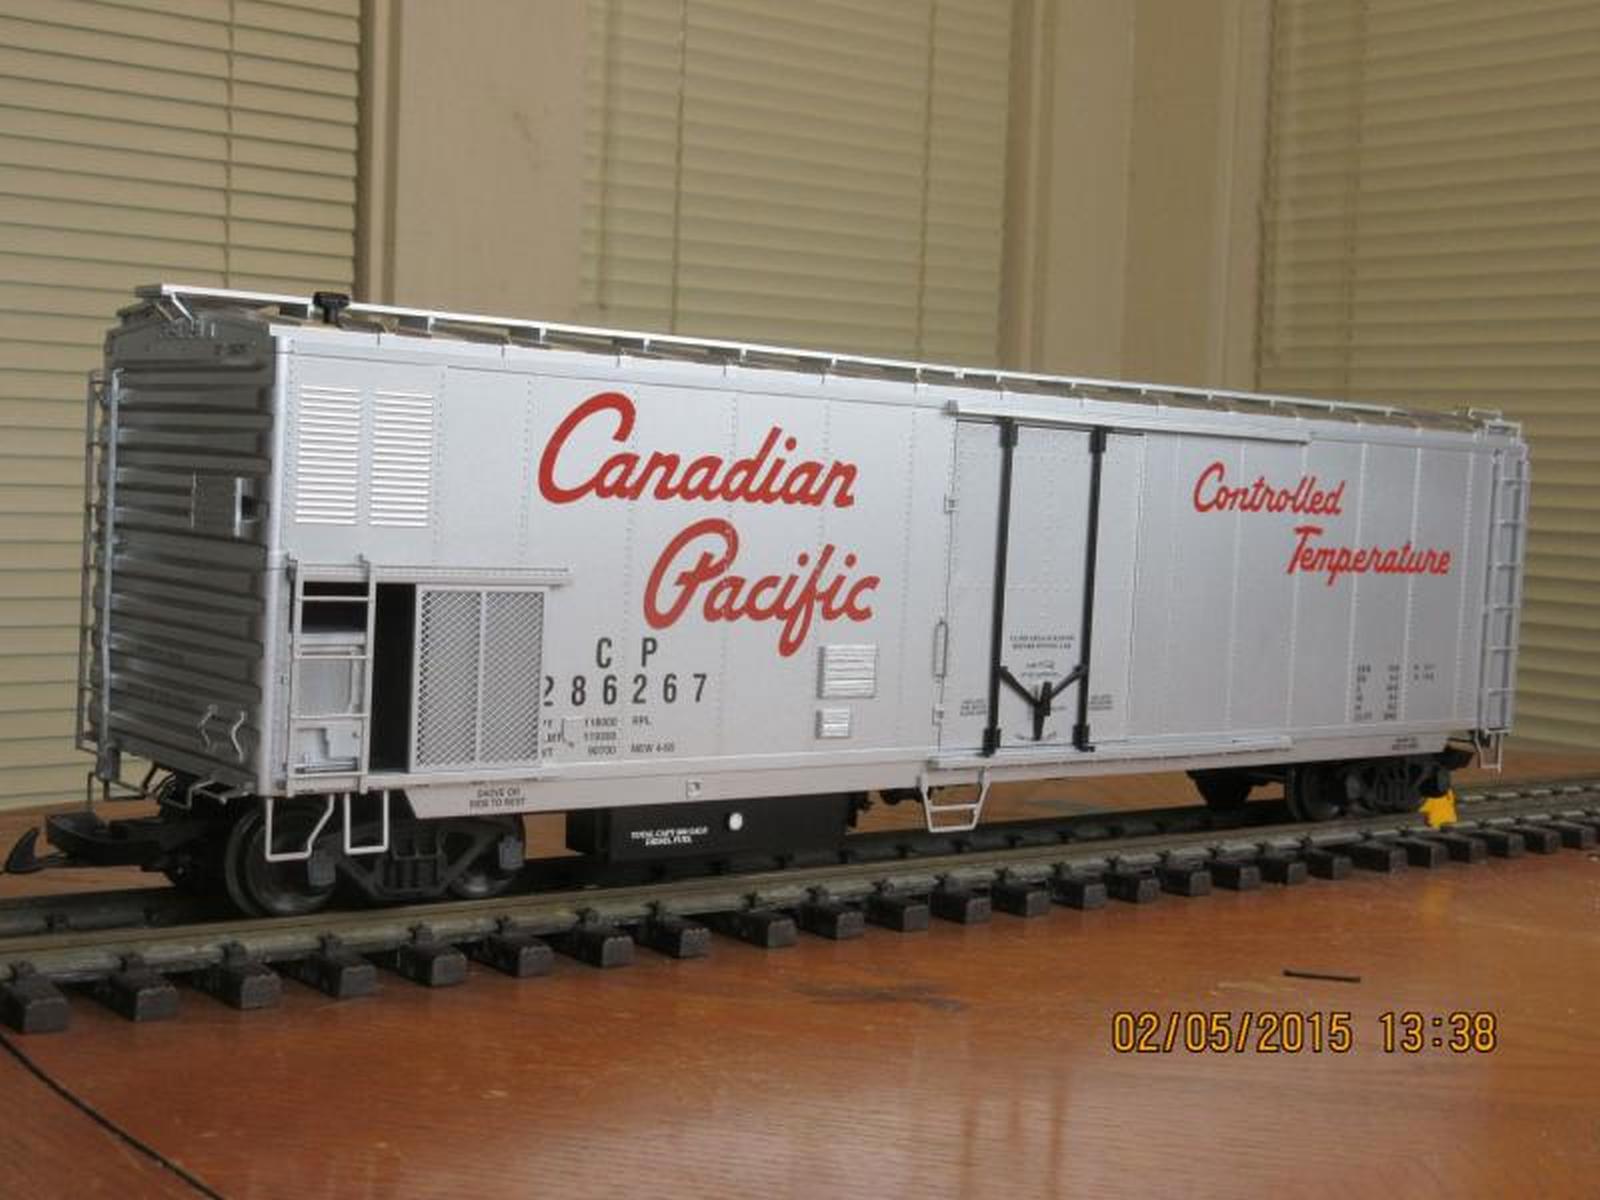 R16715 Canadian Pacific CP 286267